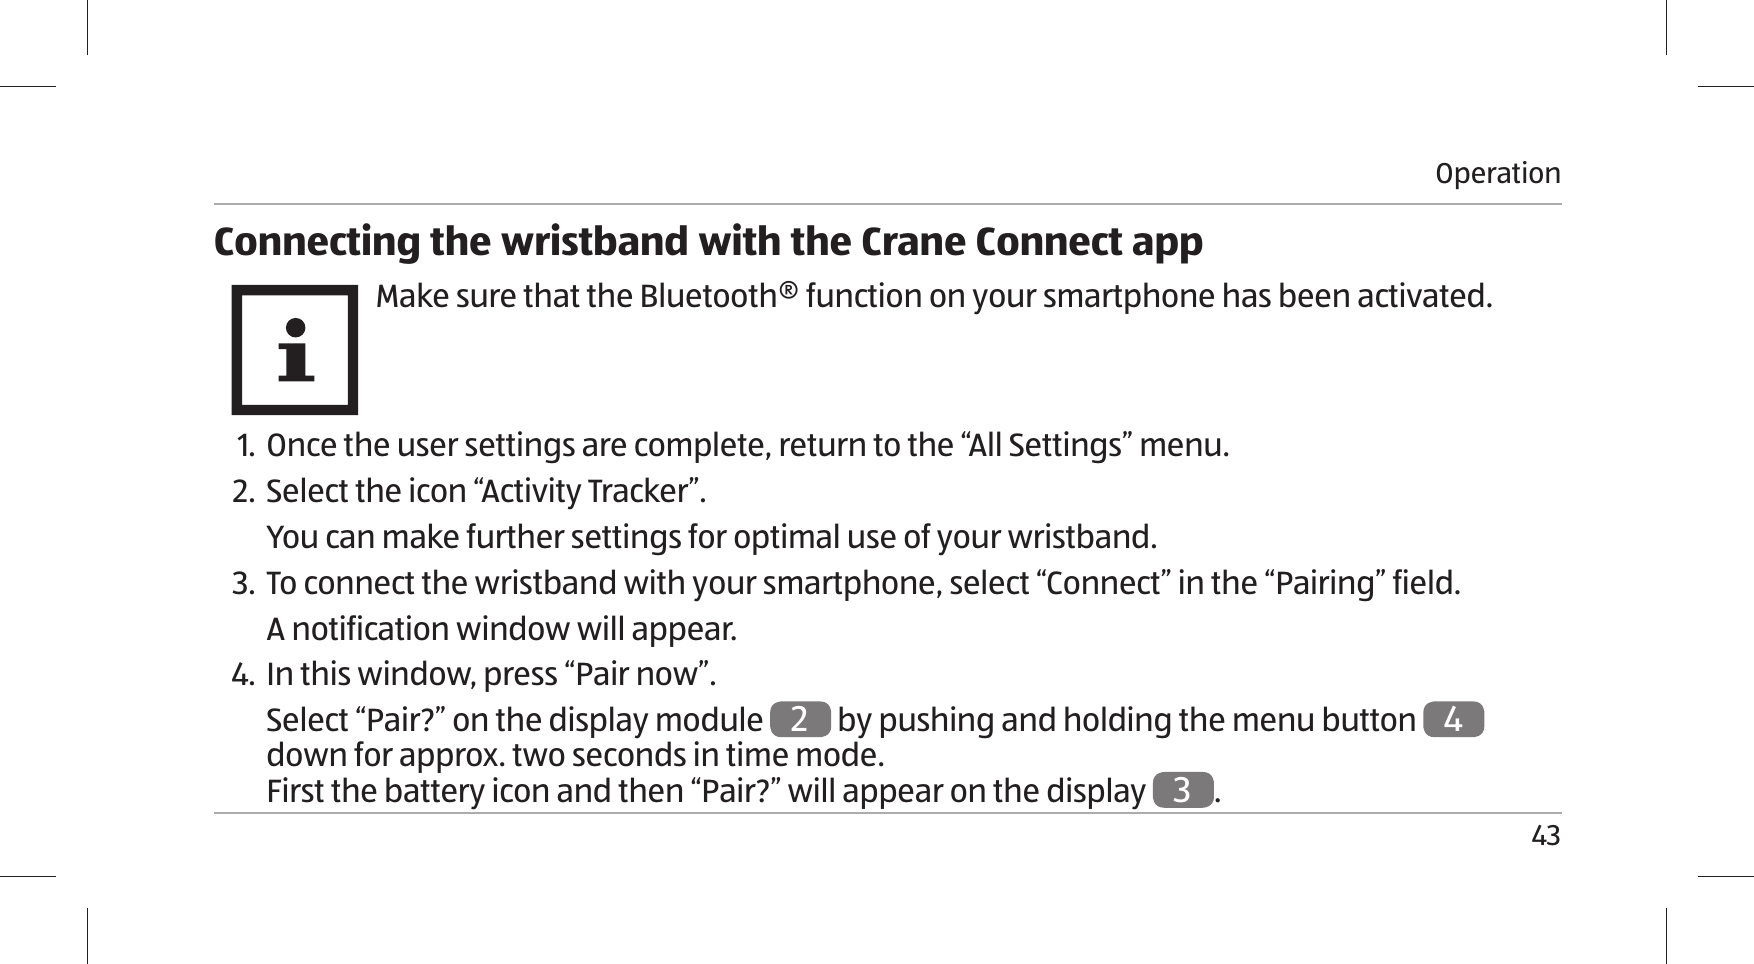 Operation43Connecting the wristband with the Crane Connect appMake sure that the Bluetooth® function on your smartphone has been activated. 1. Once the user settings are complete, return to the “All Settings” menu.2. Select the icon “Activity Tracker”.You can make further settings for optimal use of your wristband.3.  To connect the wristband with your smartphone, select “Connect” in the “Pairing” field.A notification window will appear.4. In this window, press “Pair now”.Select “Pair?” on the display module 2 by pushing and holding the menu button 4 down for approx. two seconds in time mode. First the battery icon and then “Pair?” will appear on the display 3.